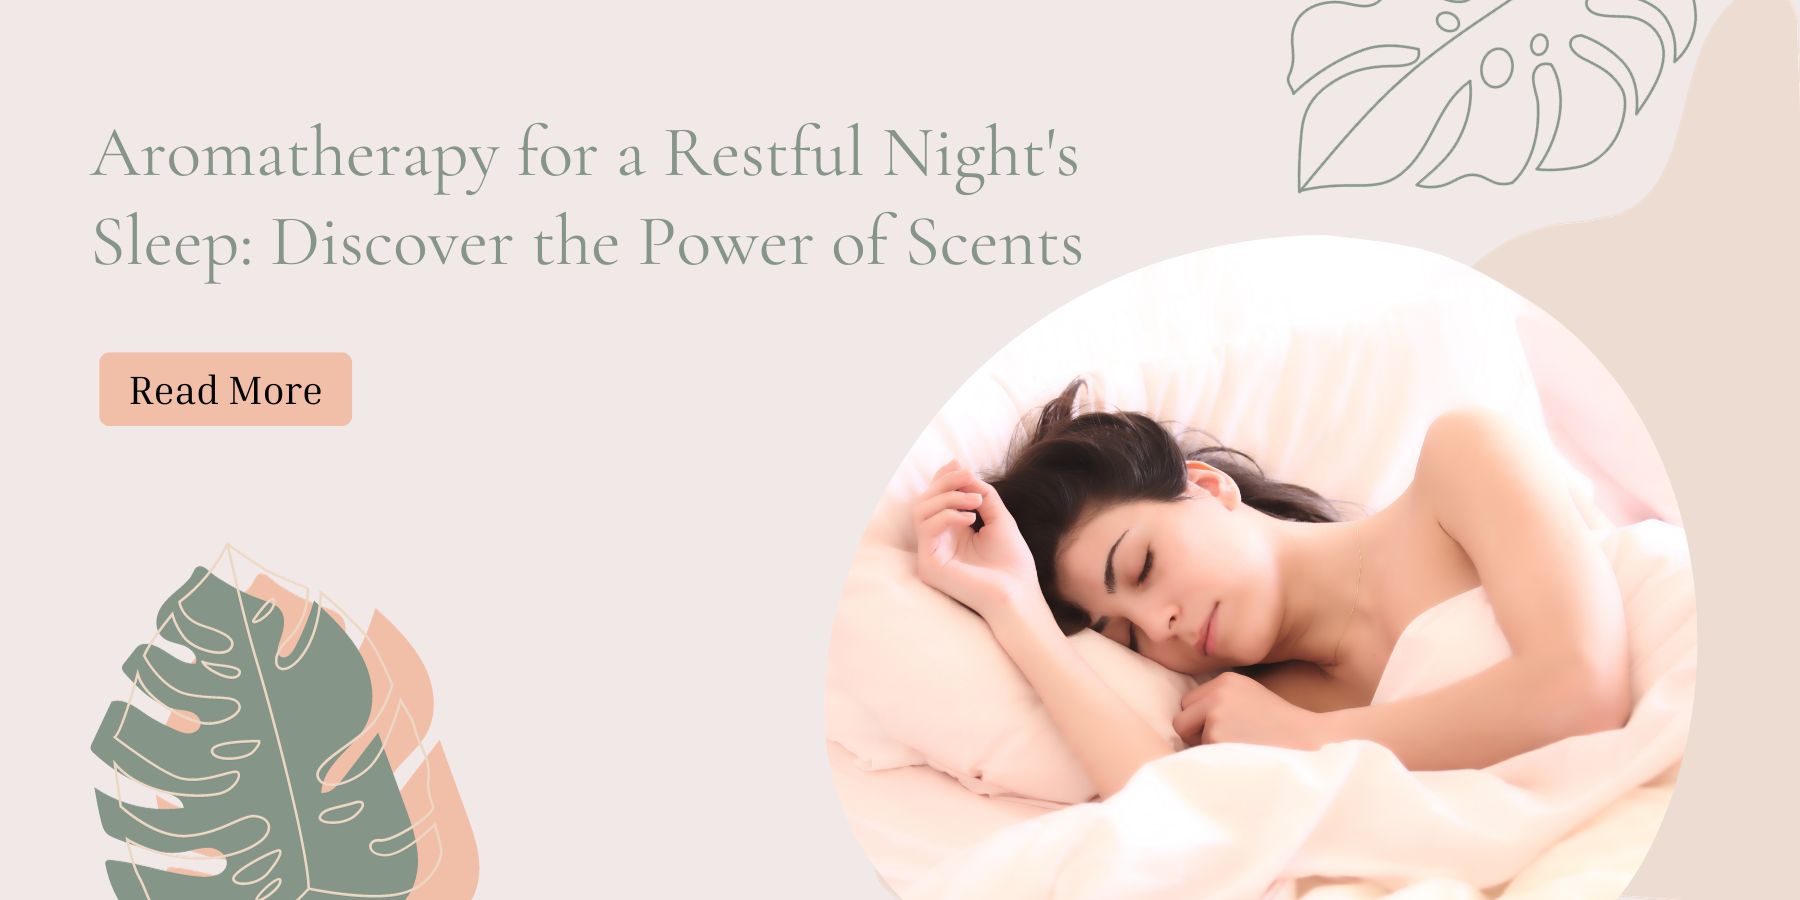 Aromatherapy for a Restful Night's Sleep: Discover the Power of Scents